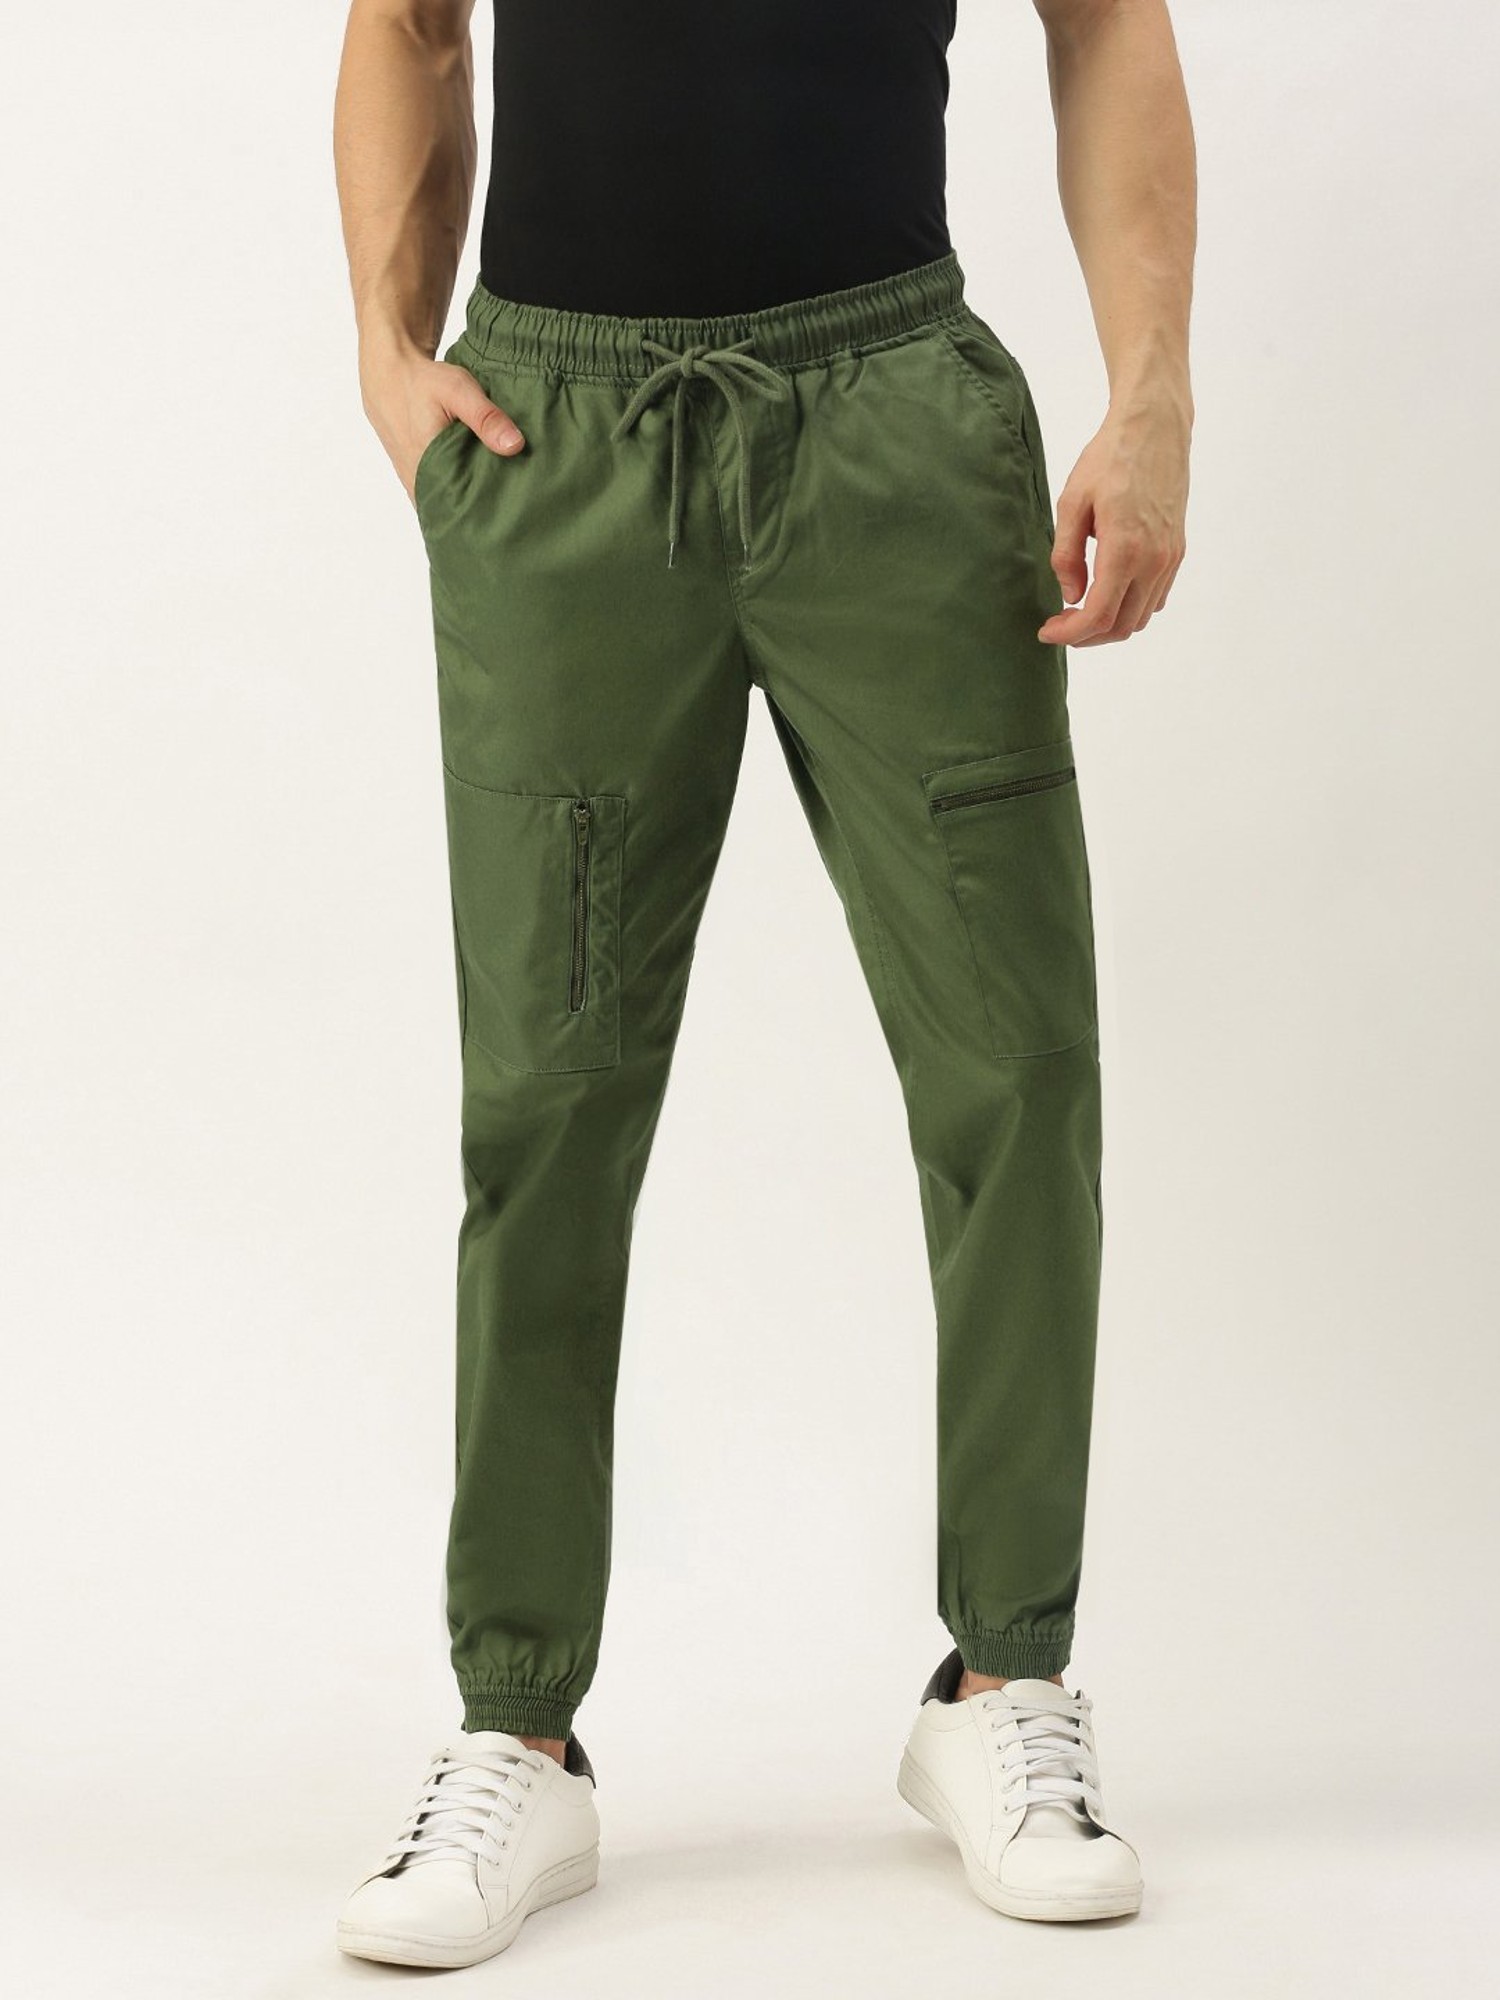 Concepts Clarity Sweatpants (Forest Green)